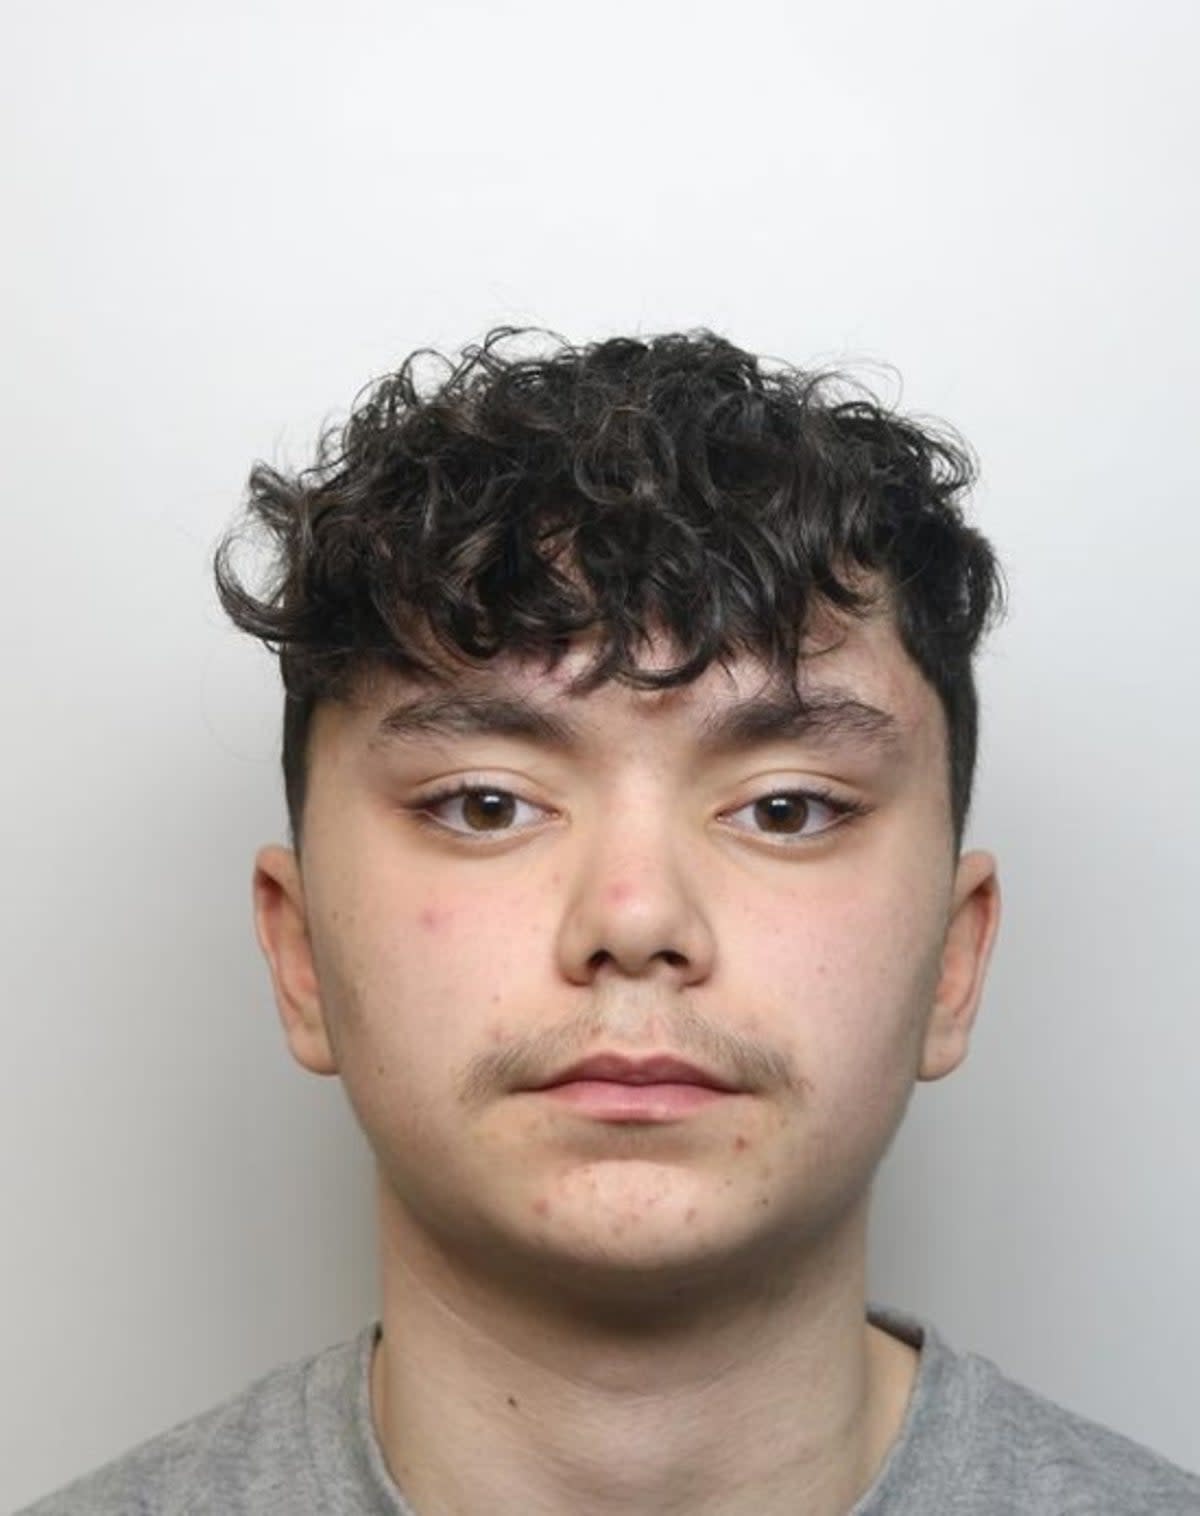 Omar Moumeche was 16 at the time of the attack (Derbyshire Police)